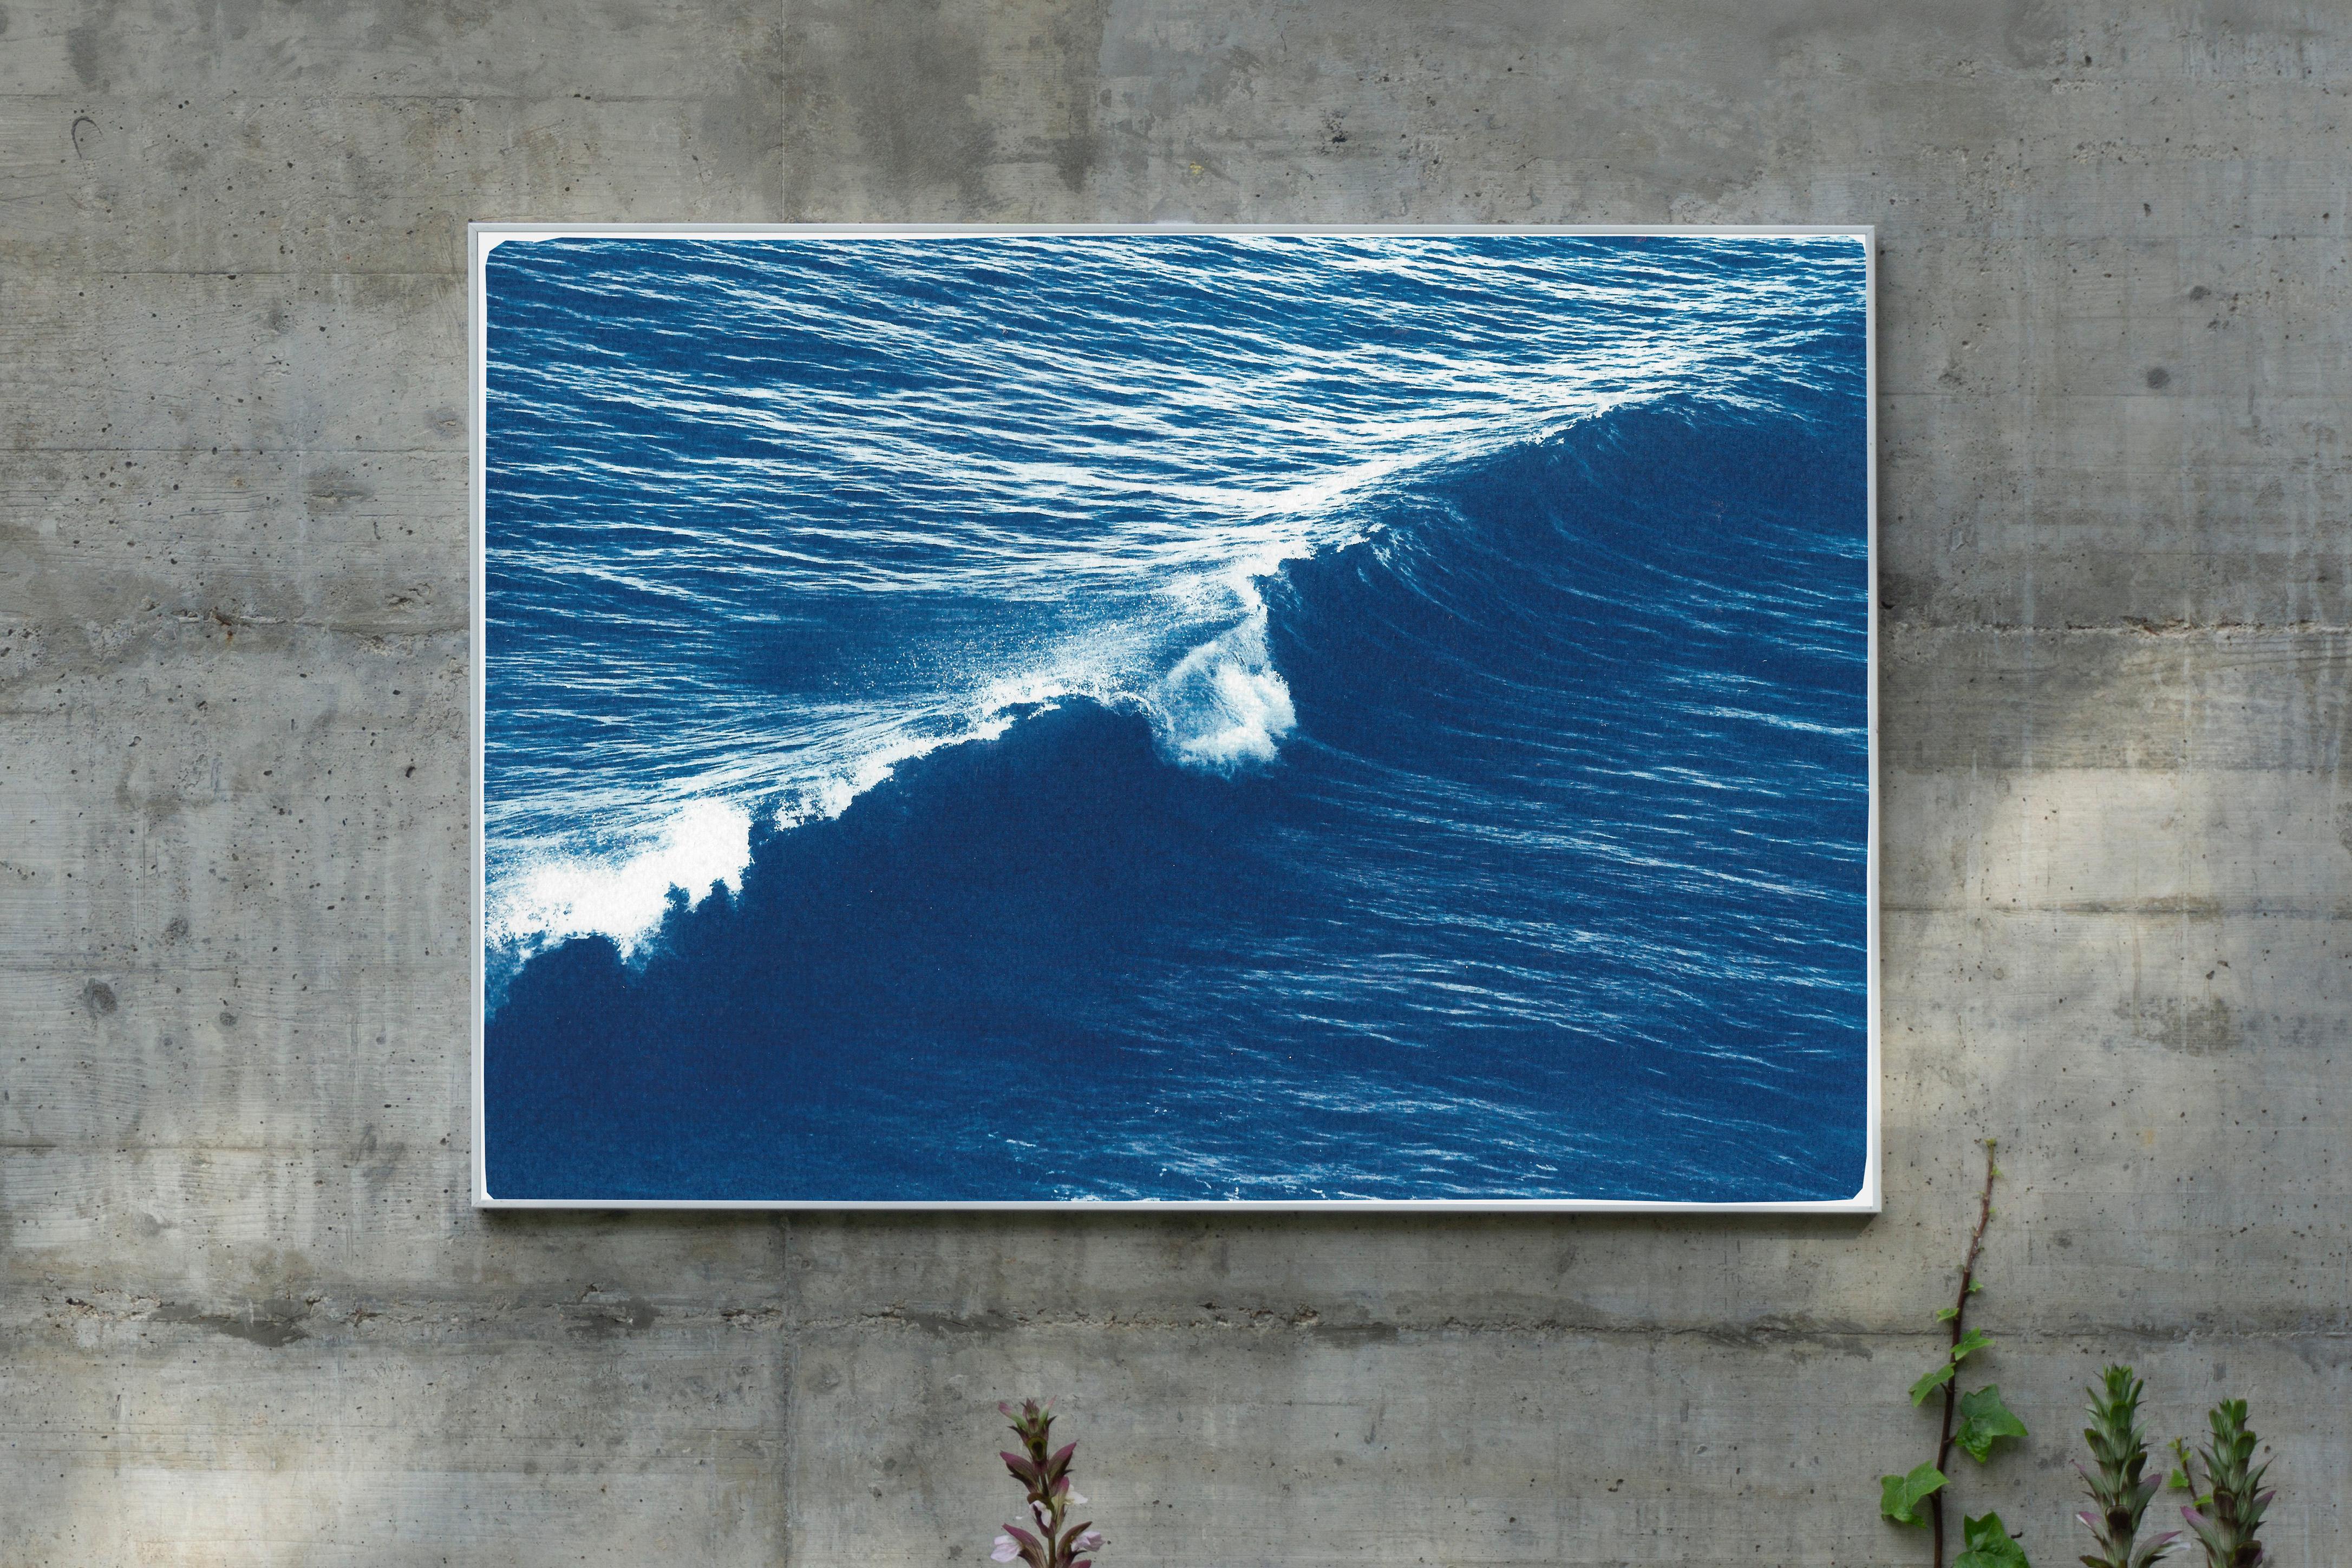 Venice Beach Seascape, Long Wave, Nautical Scene in Blue Tones, Limited Edition - Art by Kind of Cyan